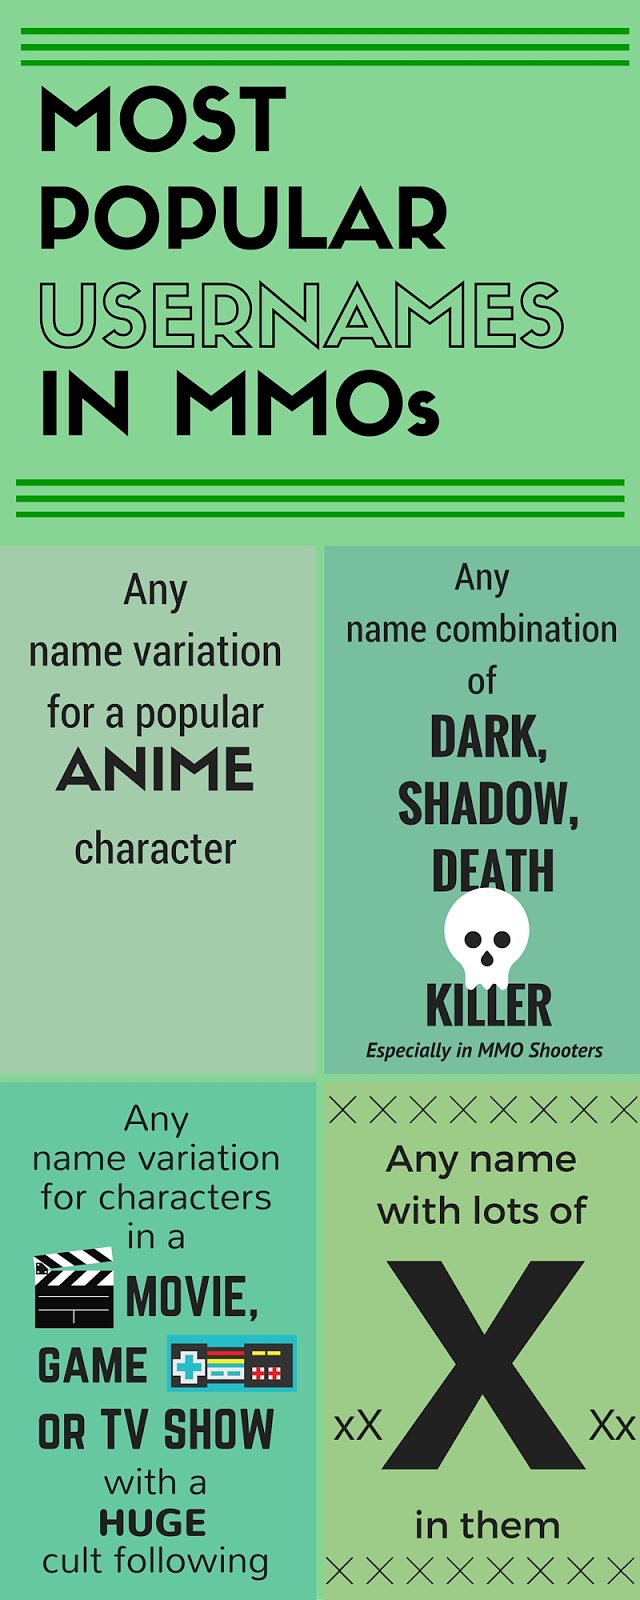 Usernames For Games - gamer cool names for gaming